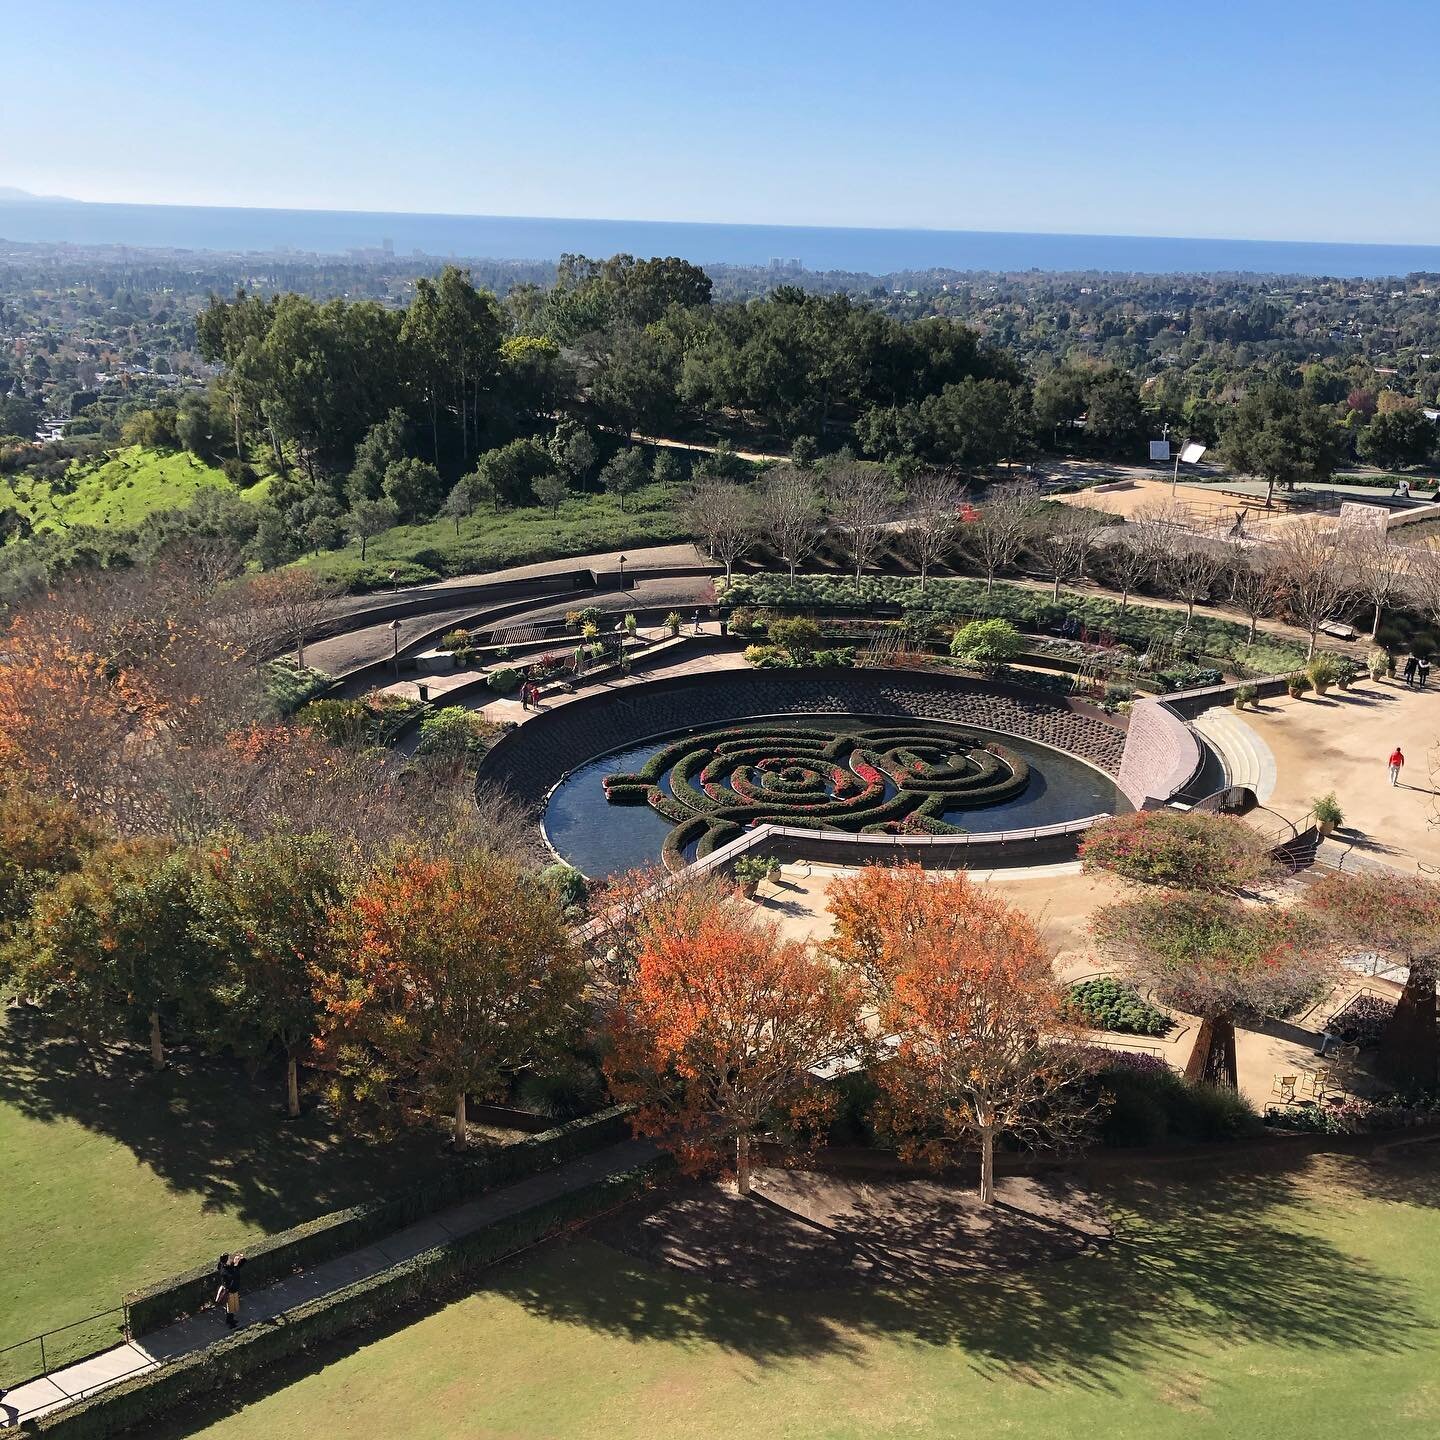 In honor of Earth Day, the beautiful gardens at the Getty Center in LA. A great place to visit and enjoy nature!
#visitcalifornia #gardentravel